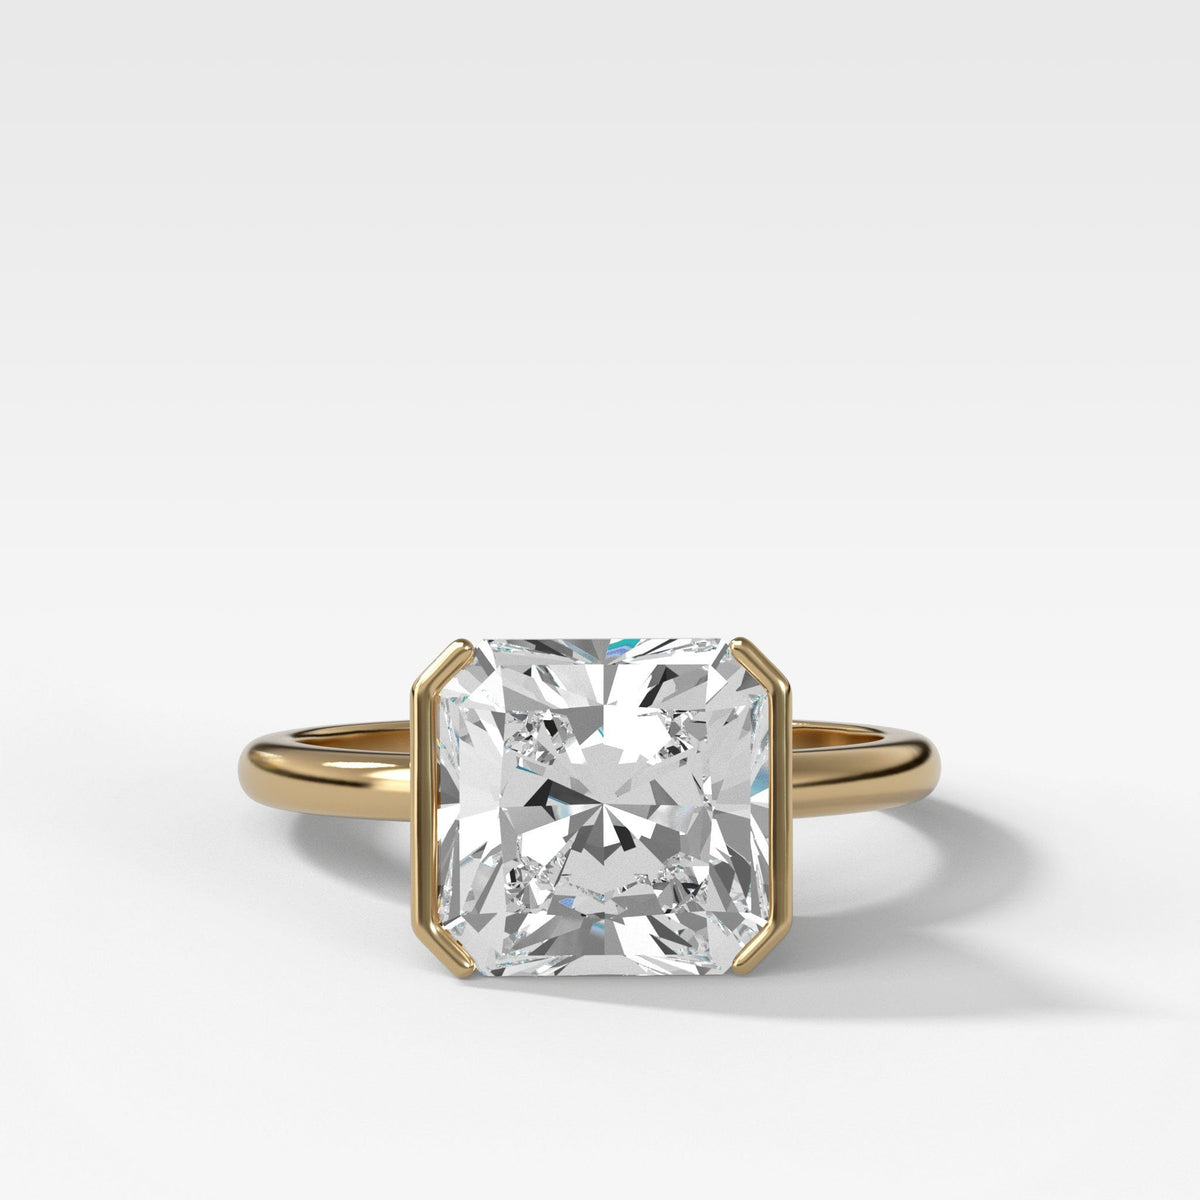 Half Bezel Solitaire Engagement Ring With Square Radiant Cut by Good Stone in Yellow Gold